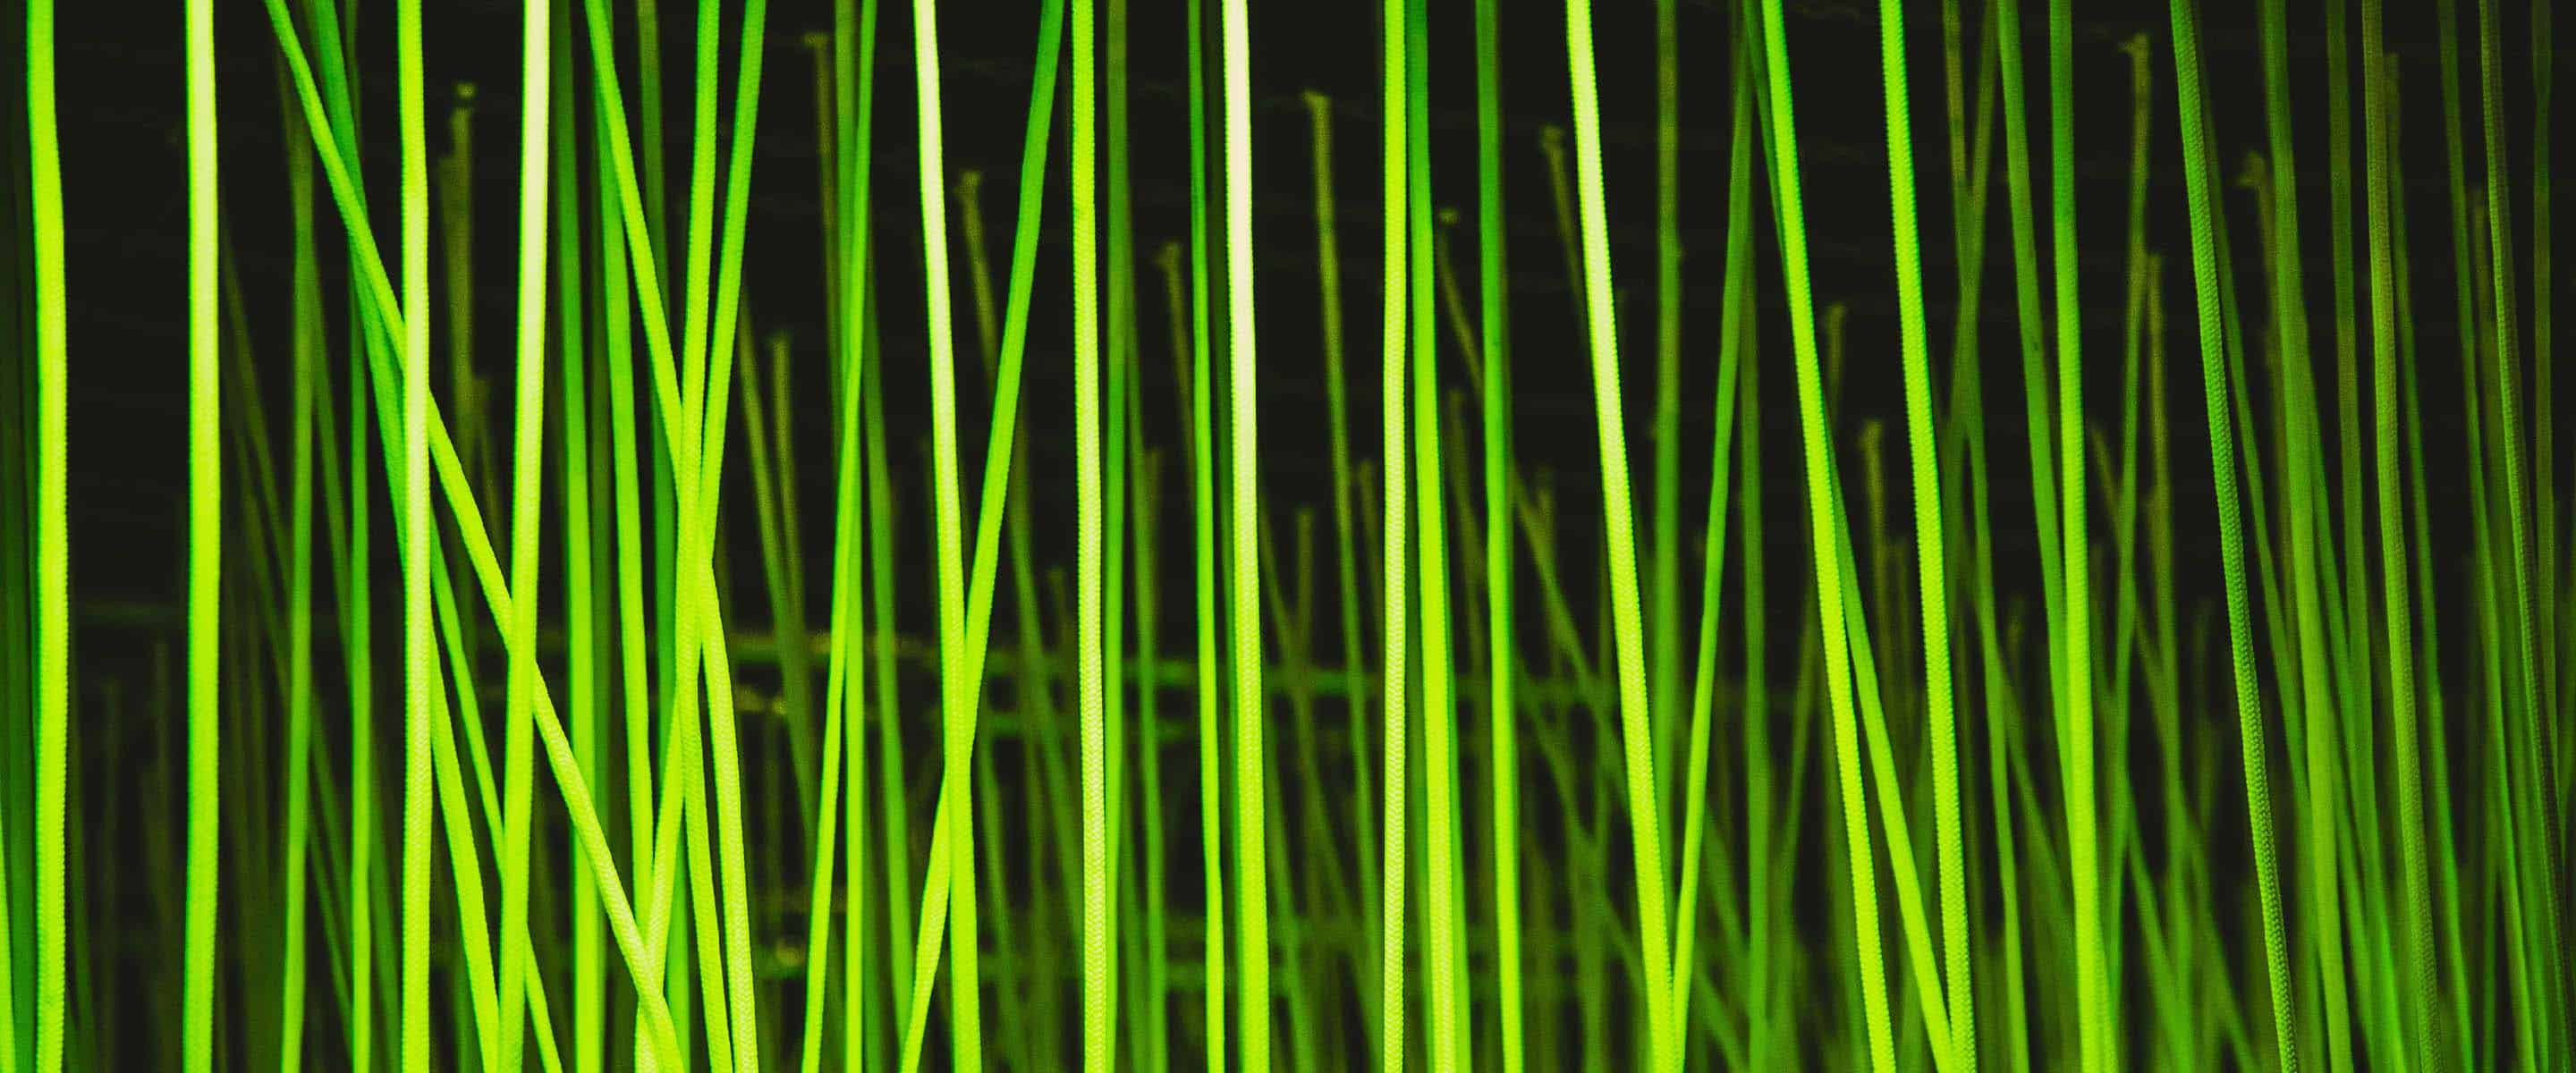 A header image showing strands of glowing rope.